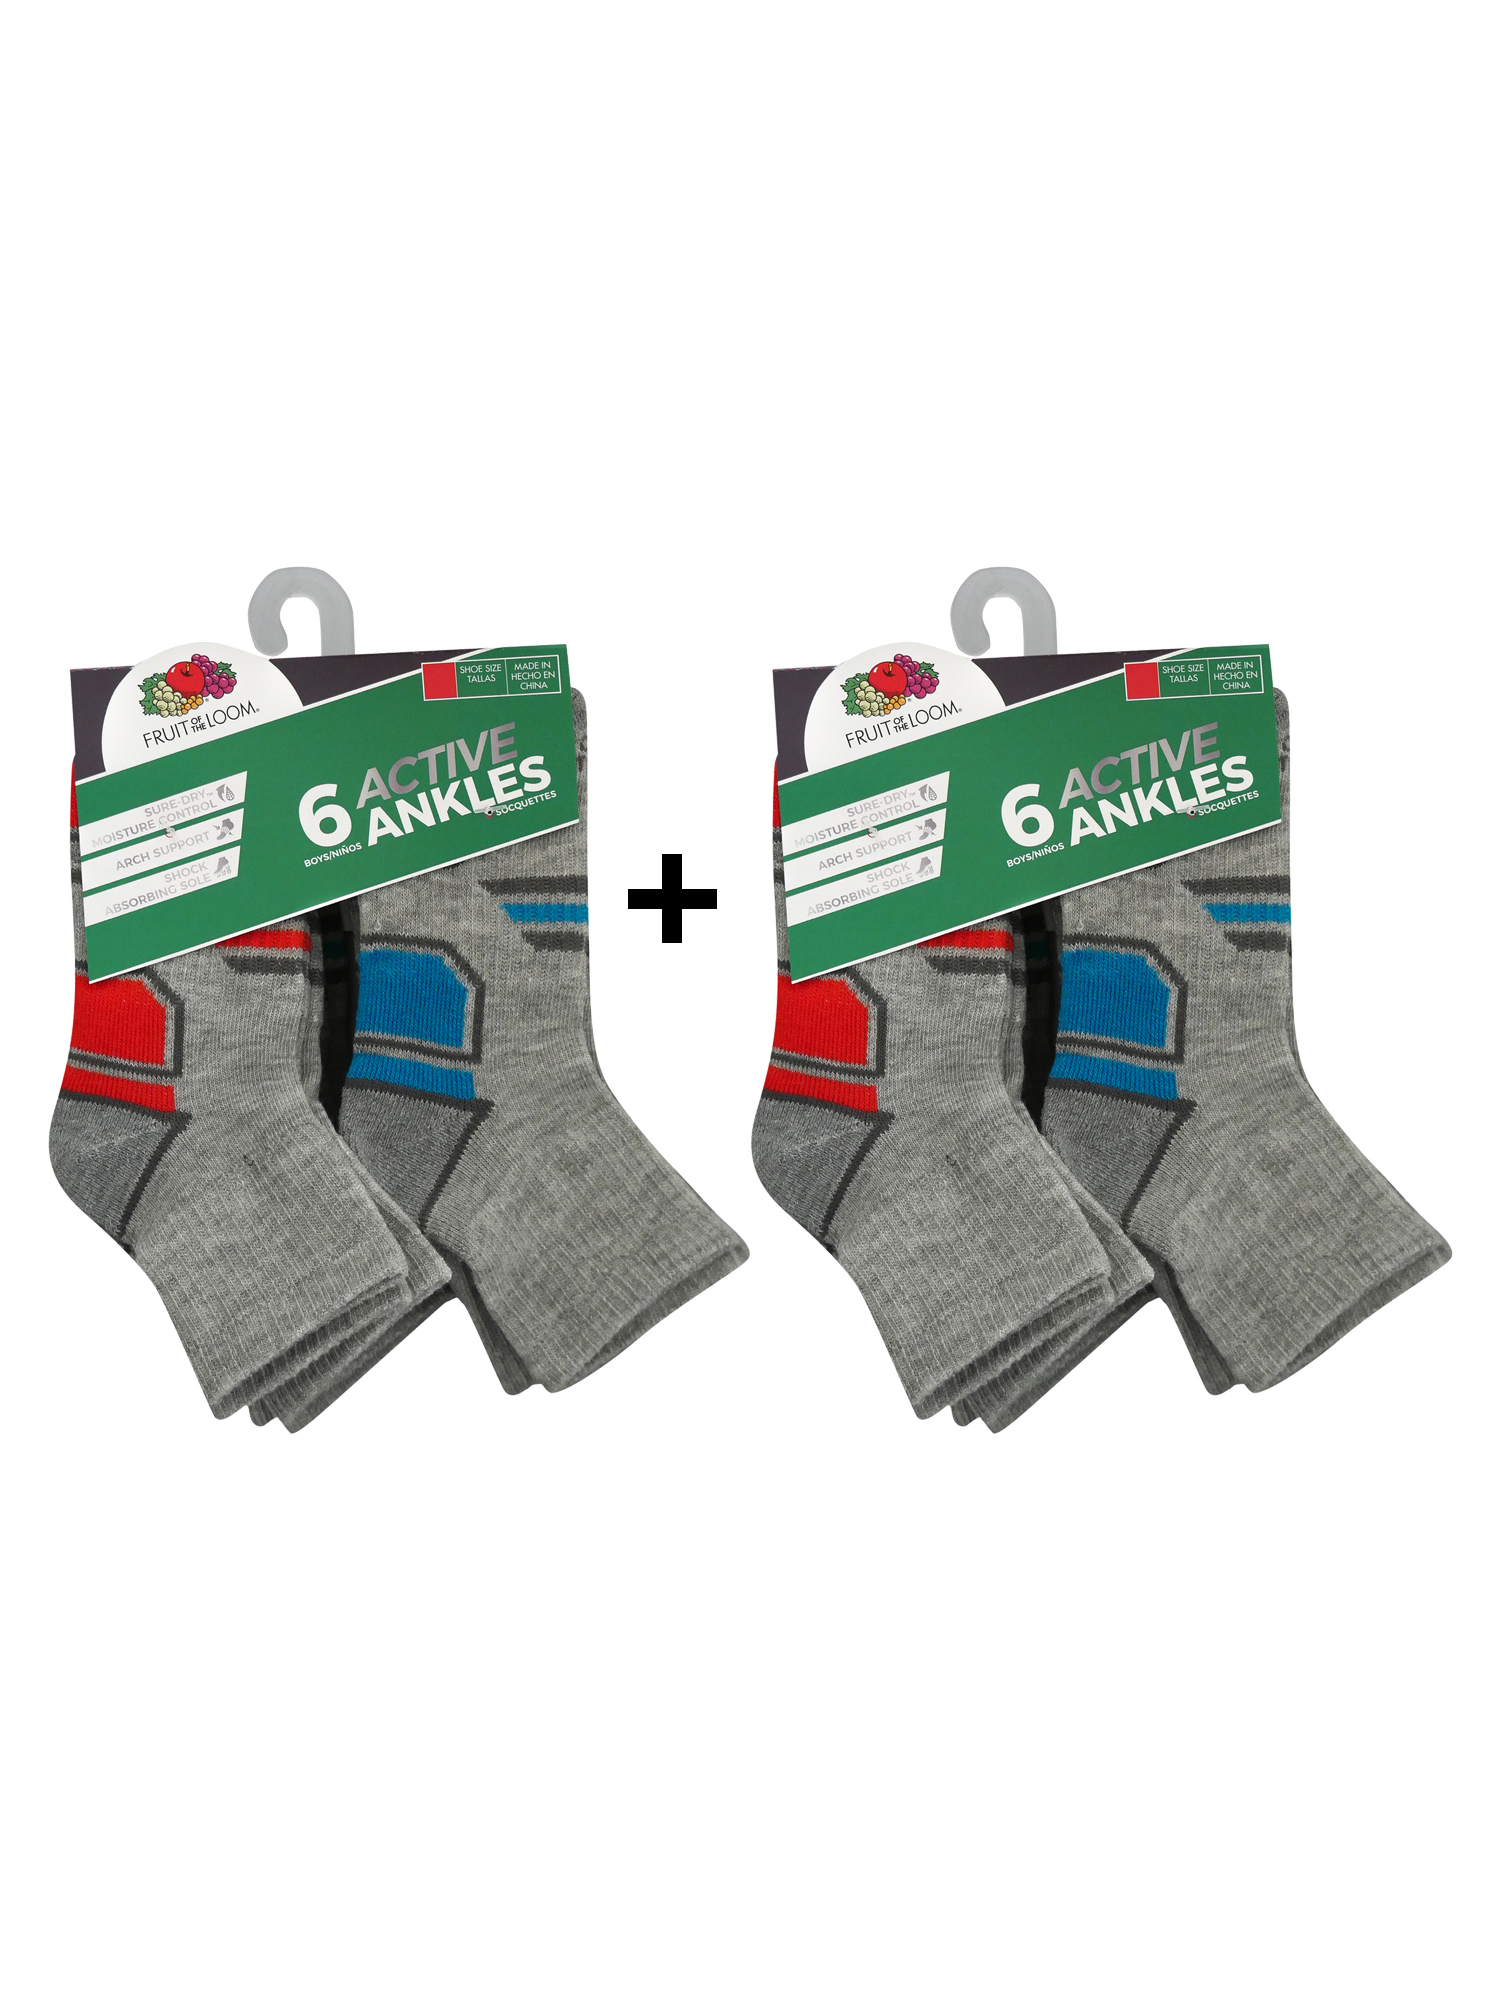 Fruit of the Loom Boys Active Ankle Socks, 12 Pack - image 5 of 5